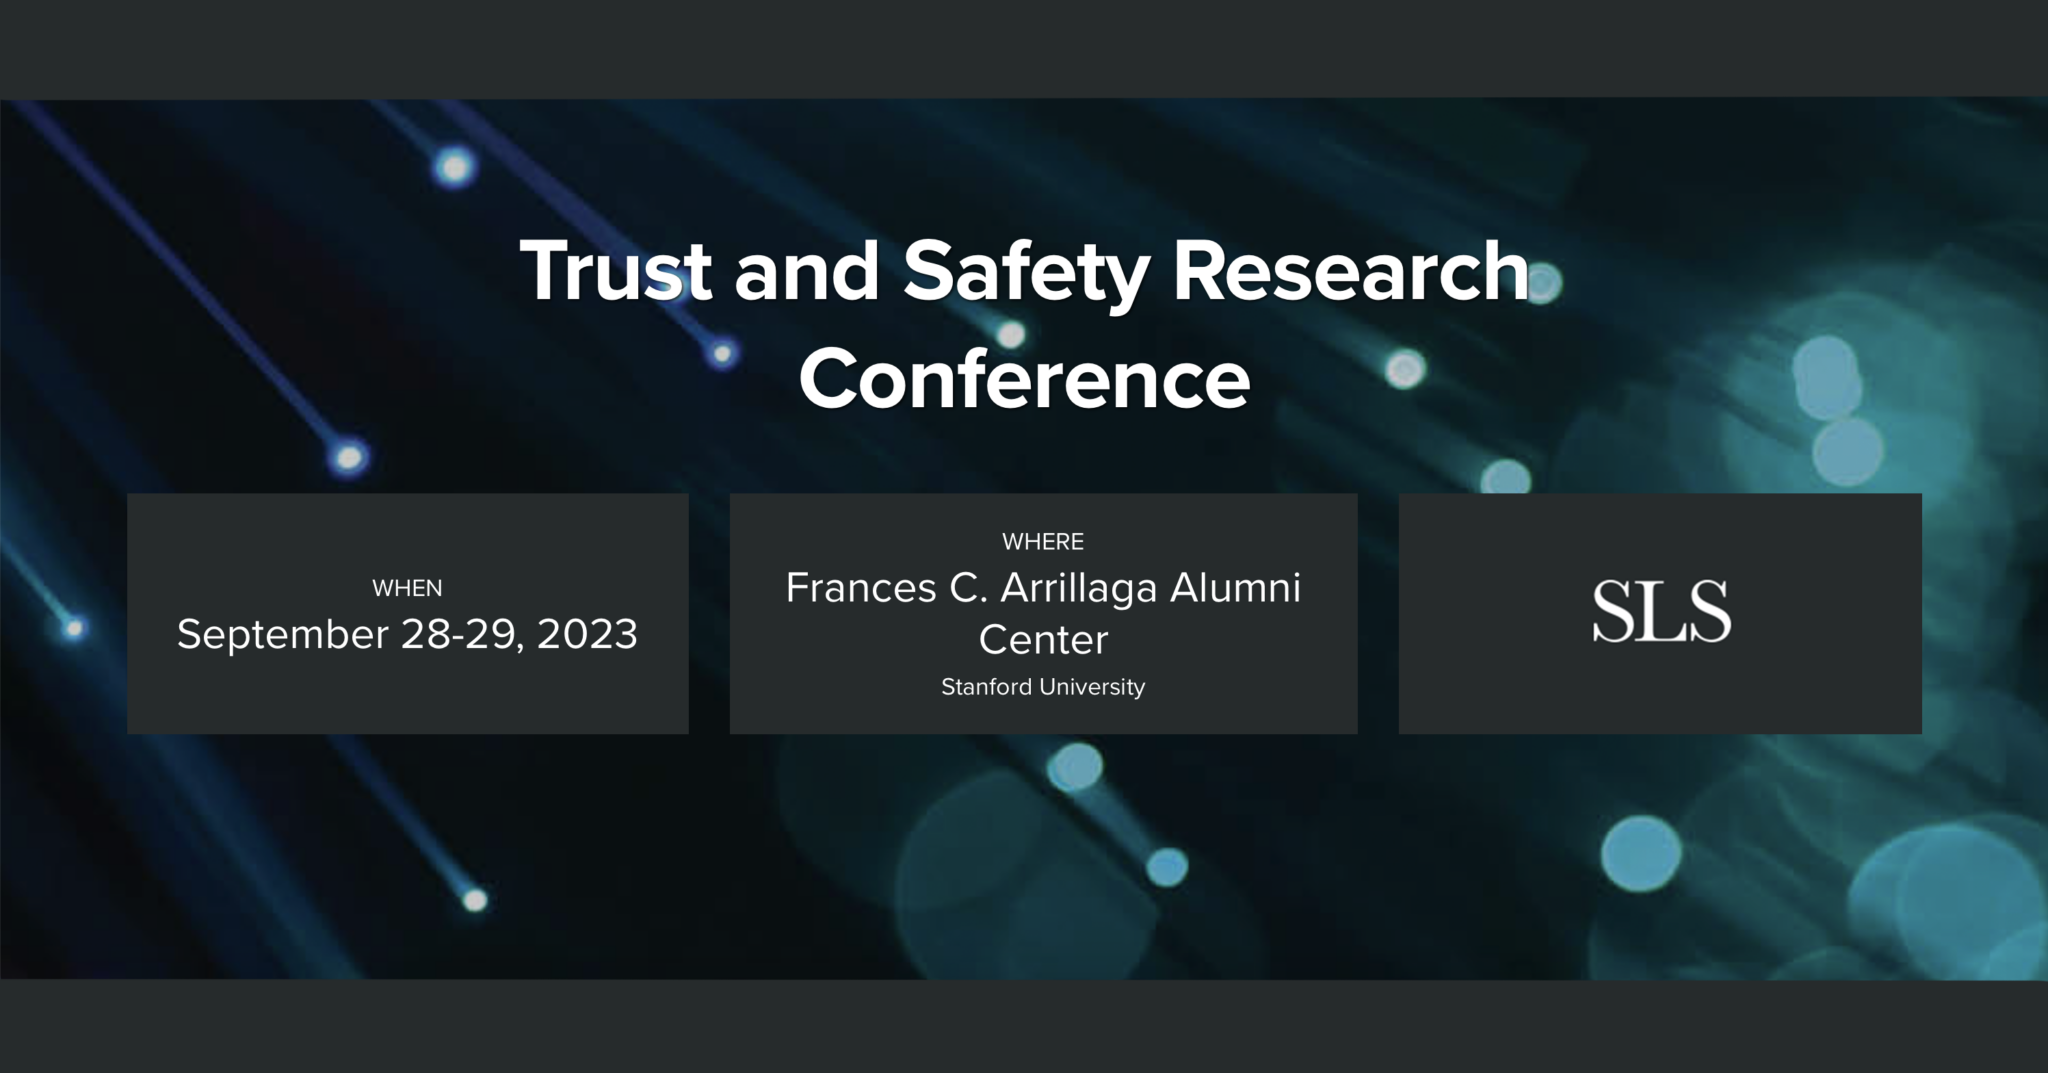 Stanford Law School’s Trust and Safety Research Conference Towards